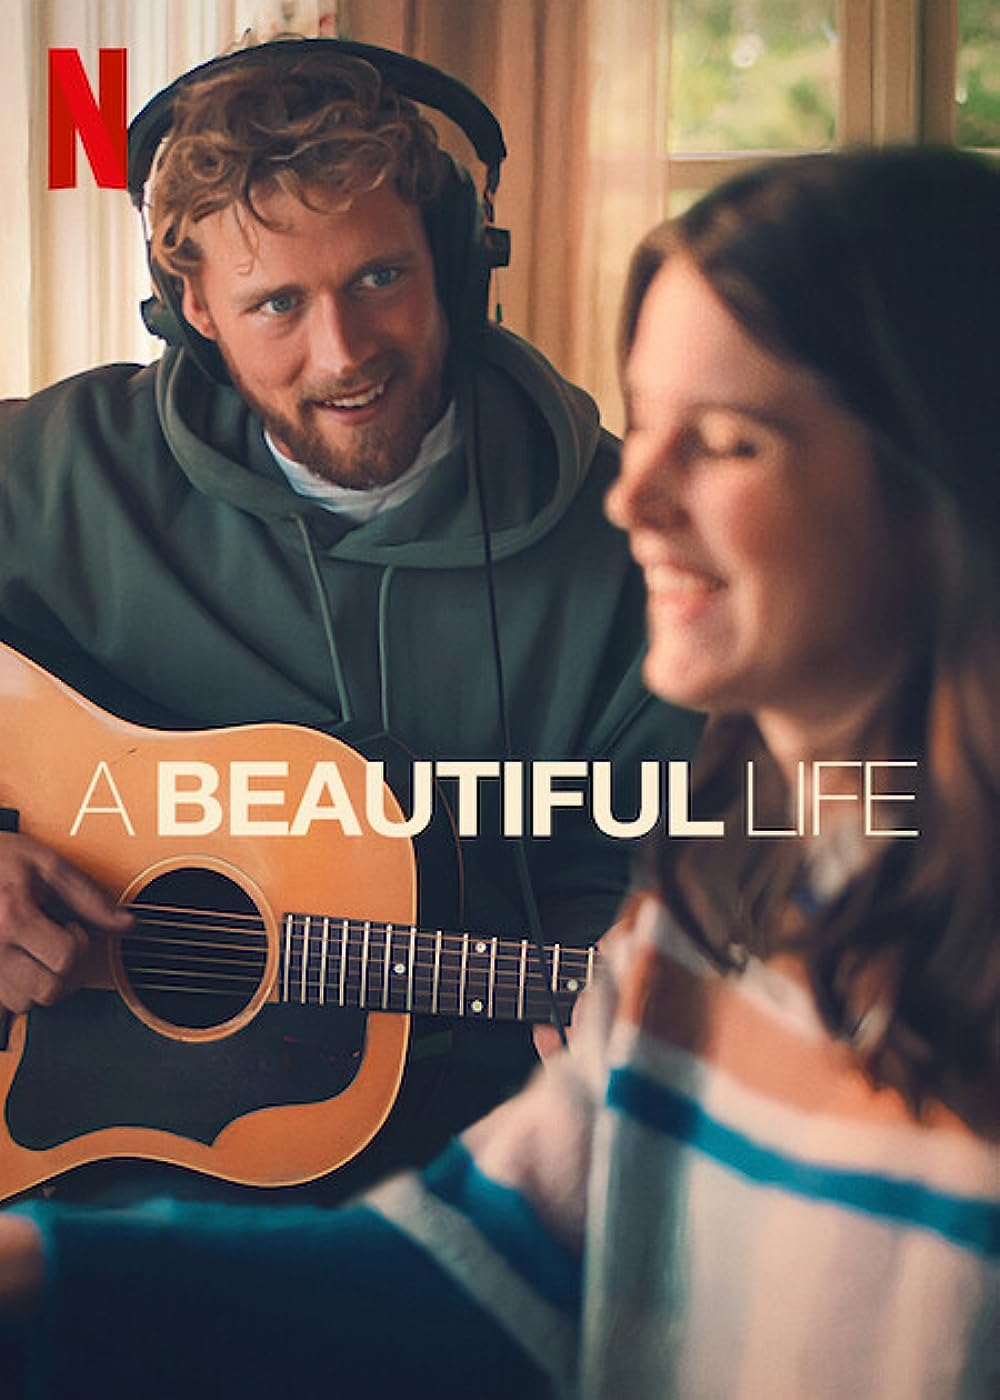 A Beautiful Life Best Motivational Movies For Students